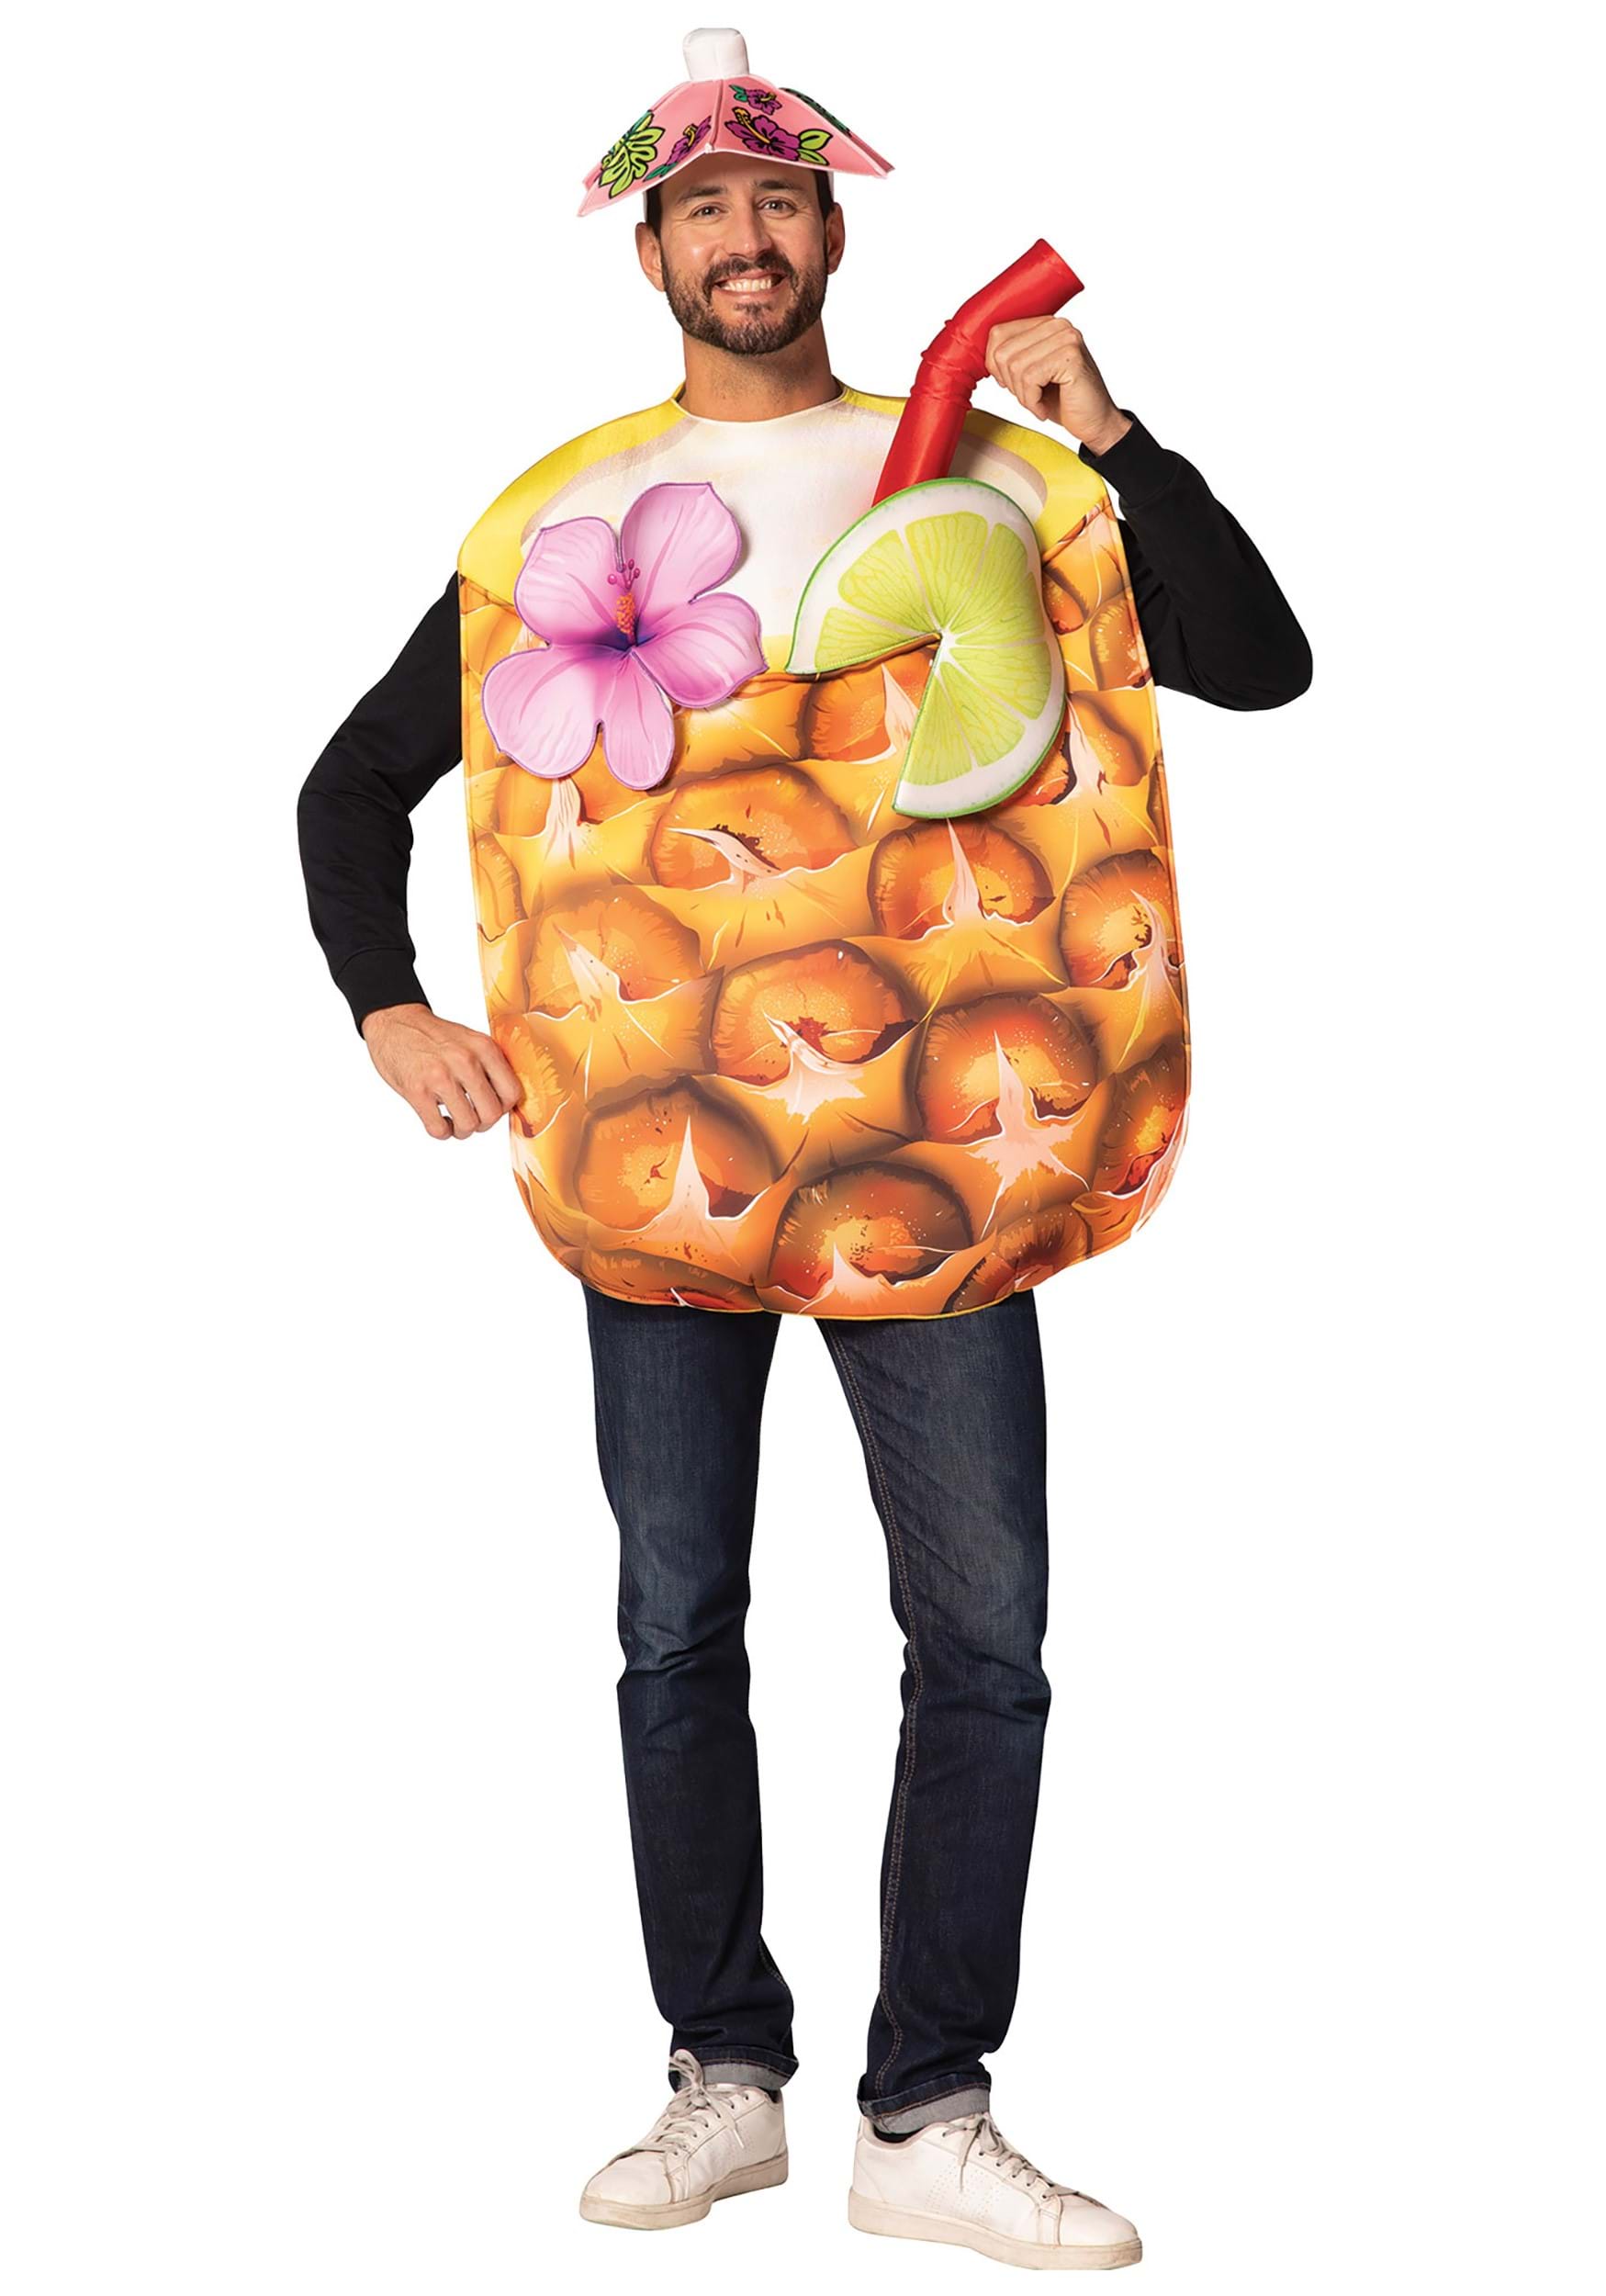 https://images.halloweencostumes.com/products/83320/1-1/adult-pineapple-cocktail-drink-costume.jpg